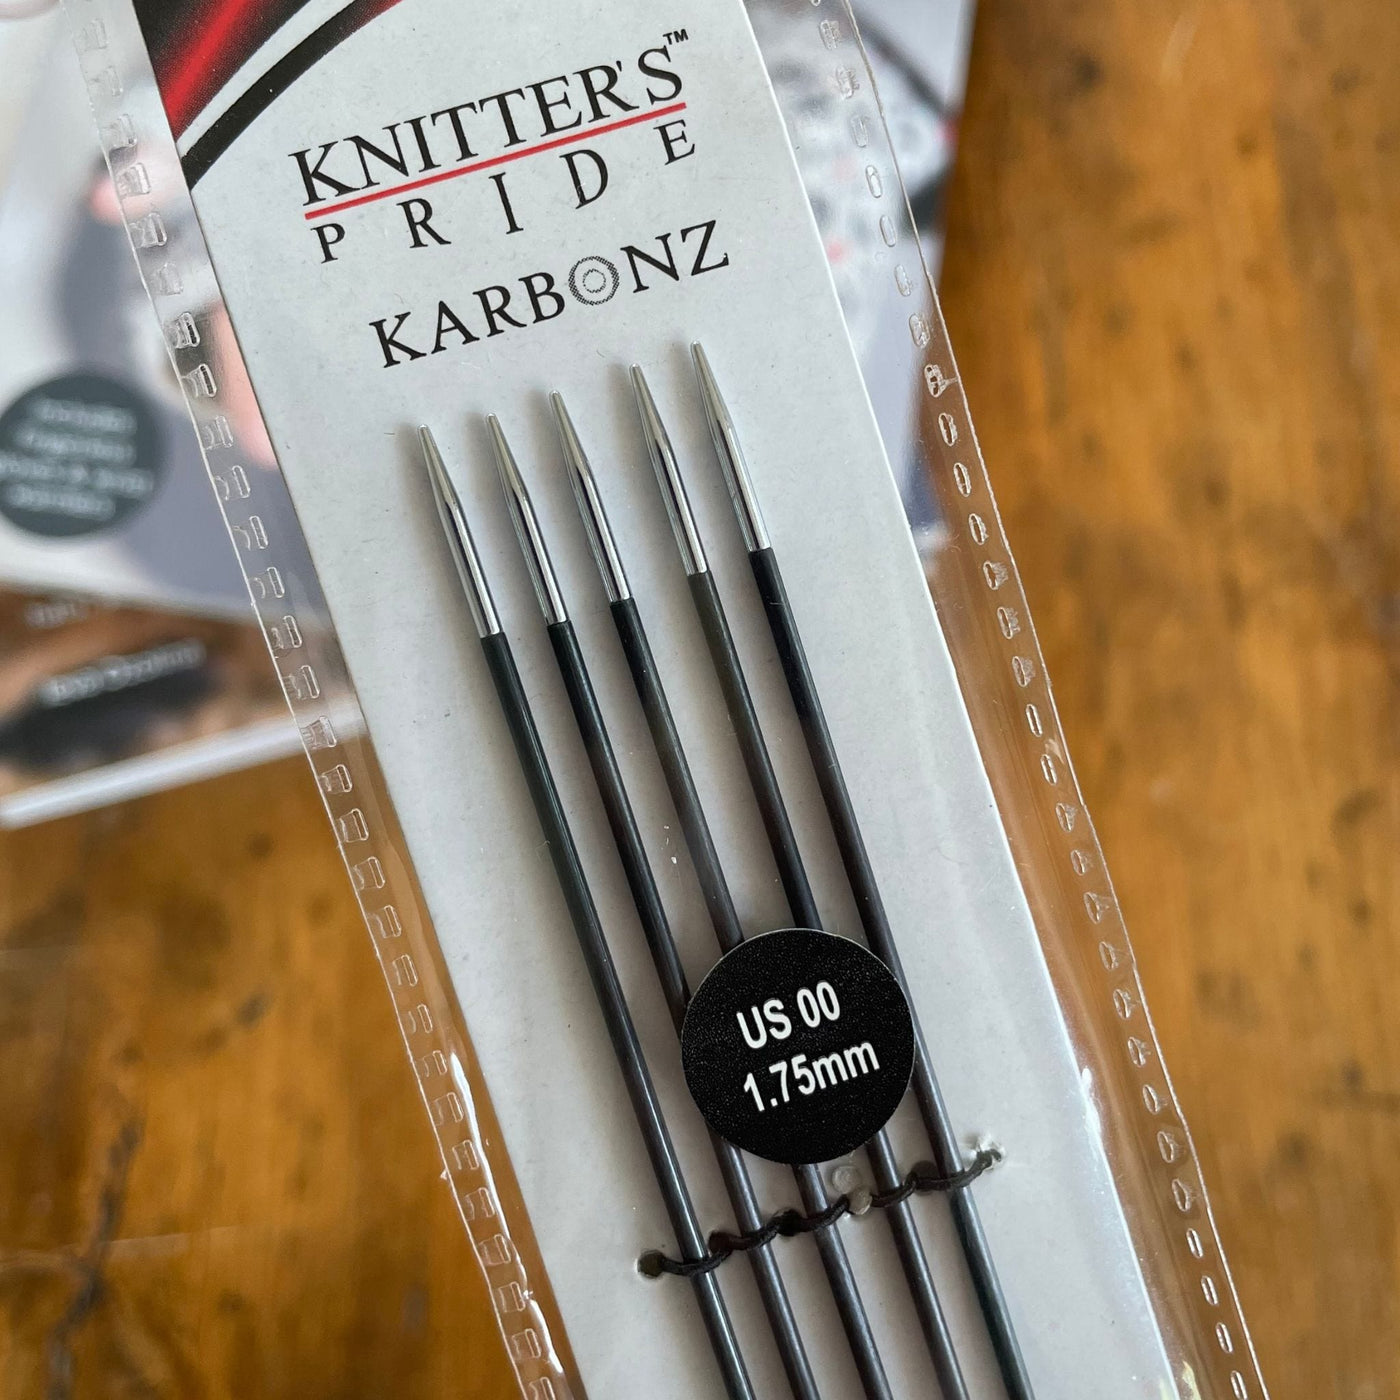 Knitter's Pride Karbonz Interchangeable Starter Set – Wool and Company